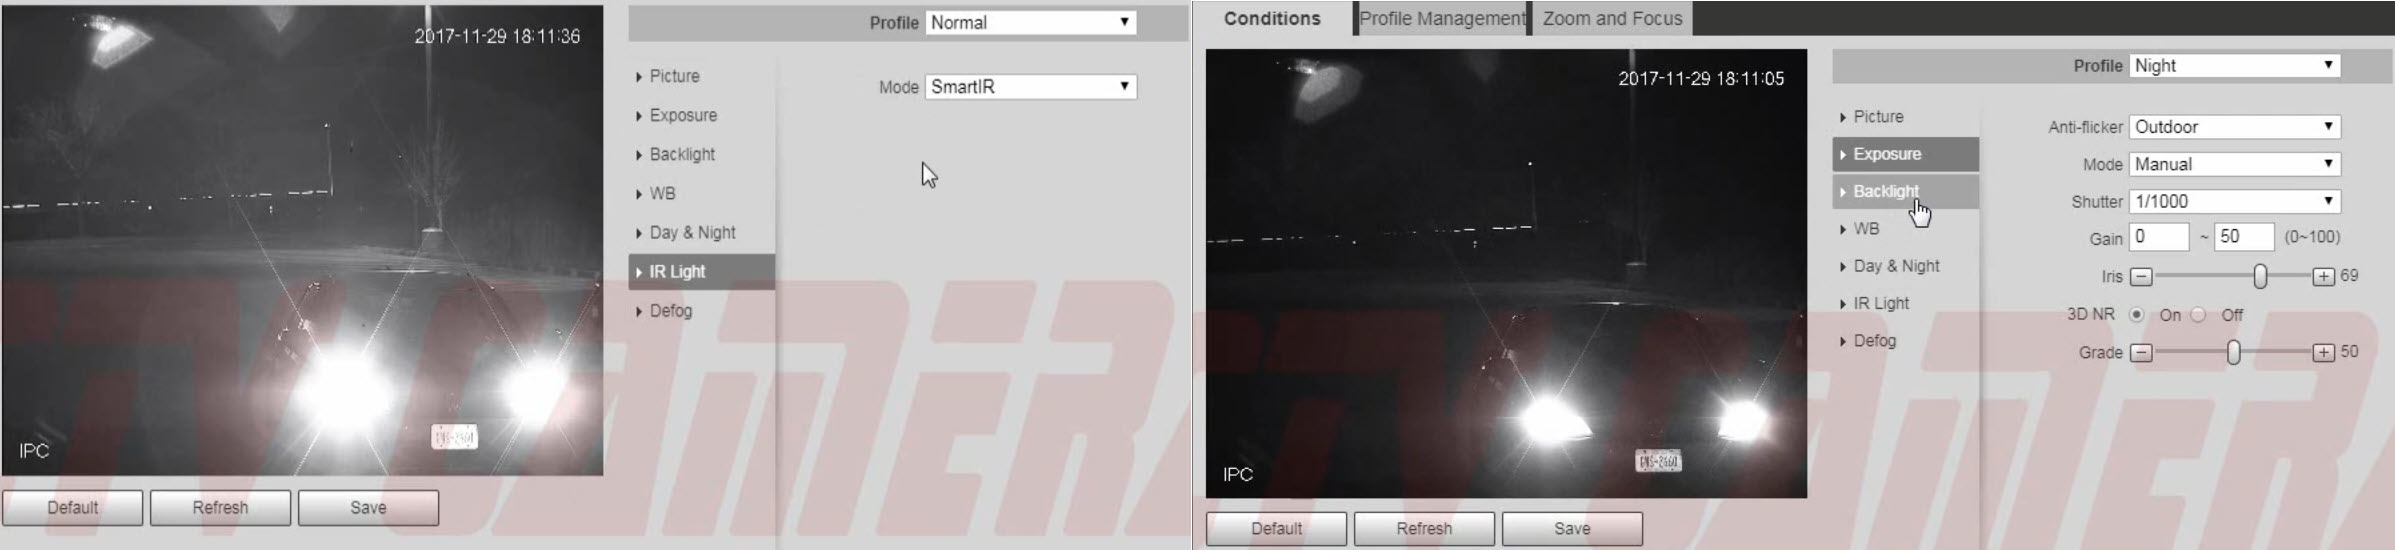 Showing ir and shutter rate settings that worked for license plate capture